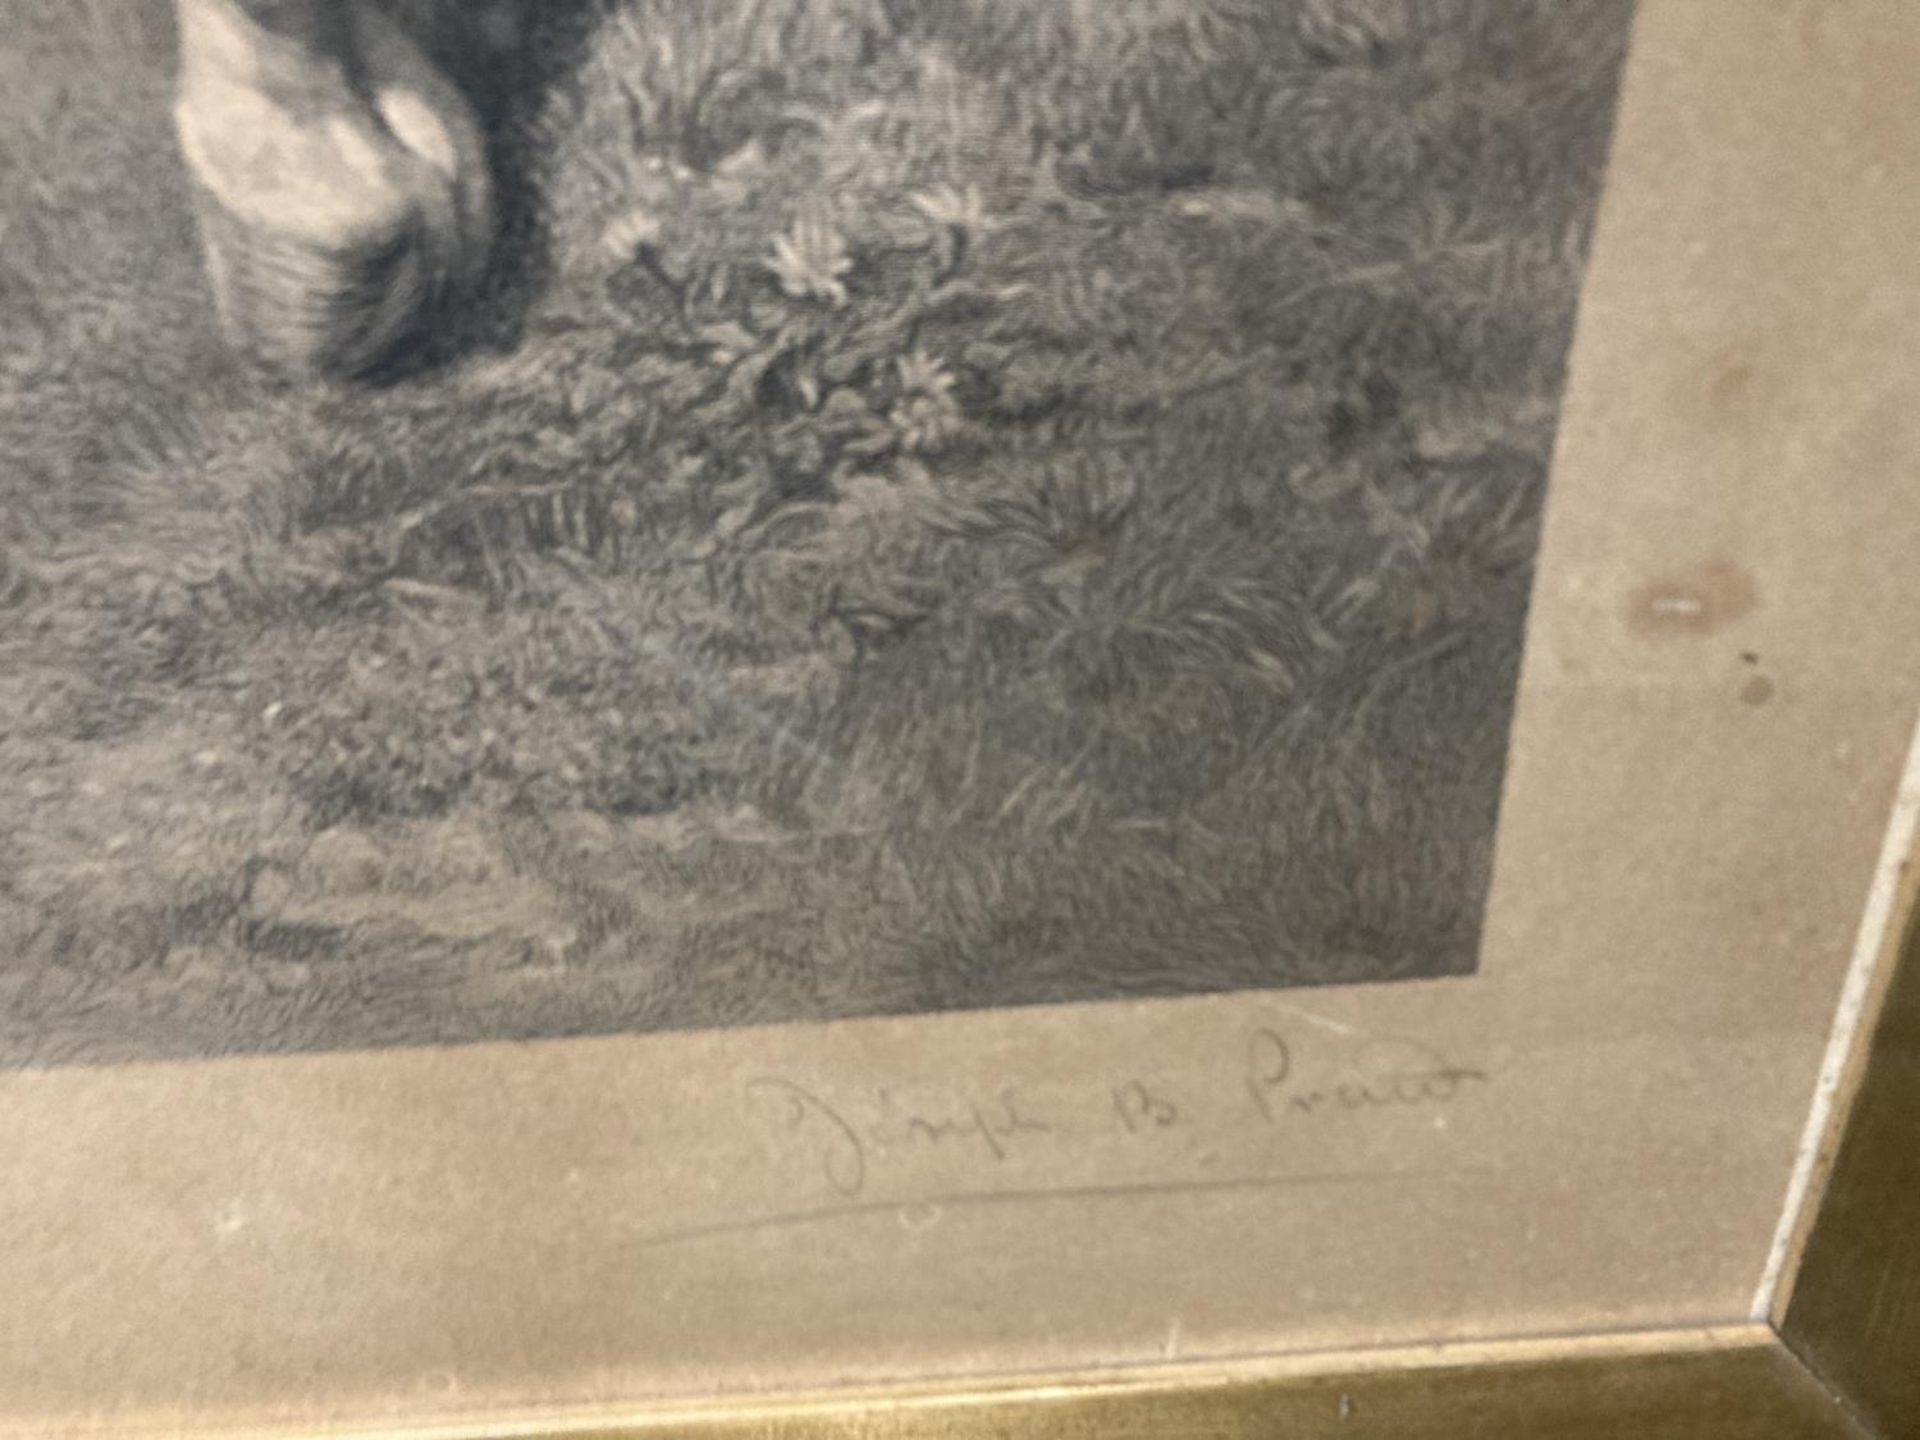 A FRAMED SIGNED PRINT OF A PAINTING BY ROSA BONHEUR OF TWO STALLIONS FIGHTING WITH GALLERY STAMP - Image 4 of 4